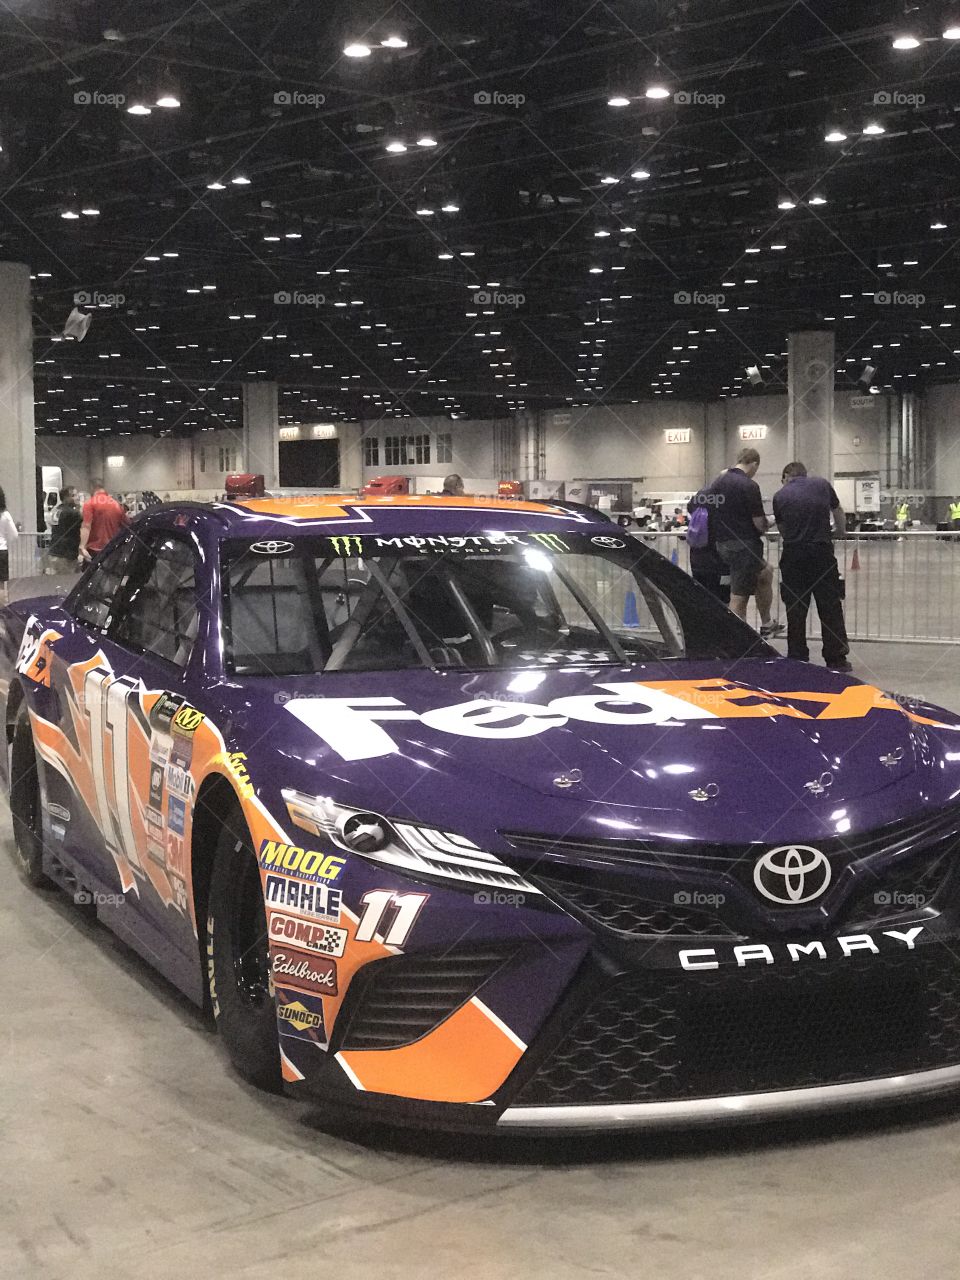 .odnalrO ni detacol tneduts FCU nA  .asleS yb kcilC Follow me @Selsa.Notes, @Selsa.Clicks, or @Selsa.Quotes.  FedEx racing car at the 80th annual National Truck Driving Championships.  #FedEx #Daytona500 #500 #race-car #racer  I tried to capture a click at every angle. There is a total of 53 photos in this album. 